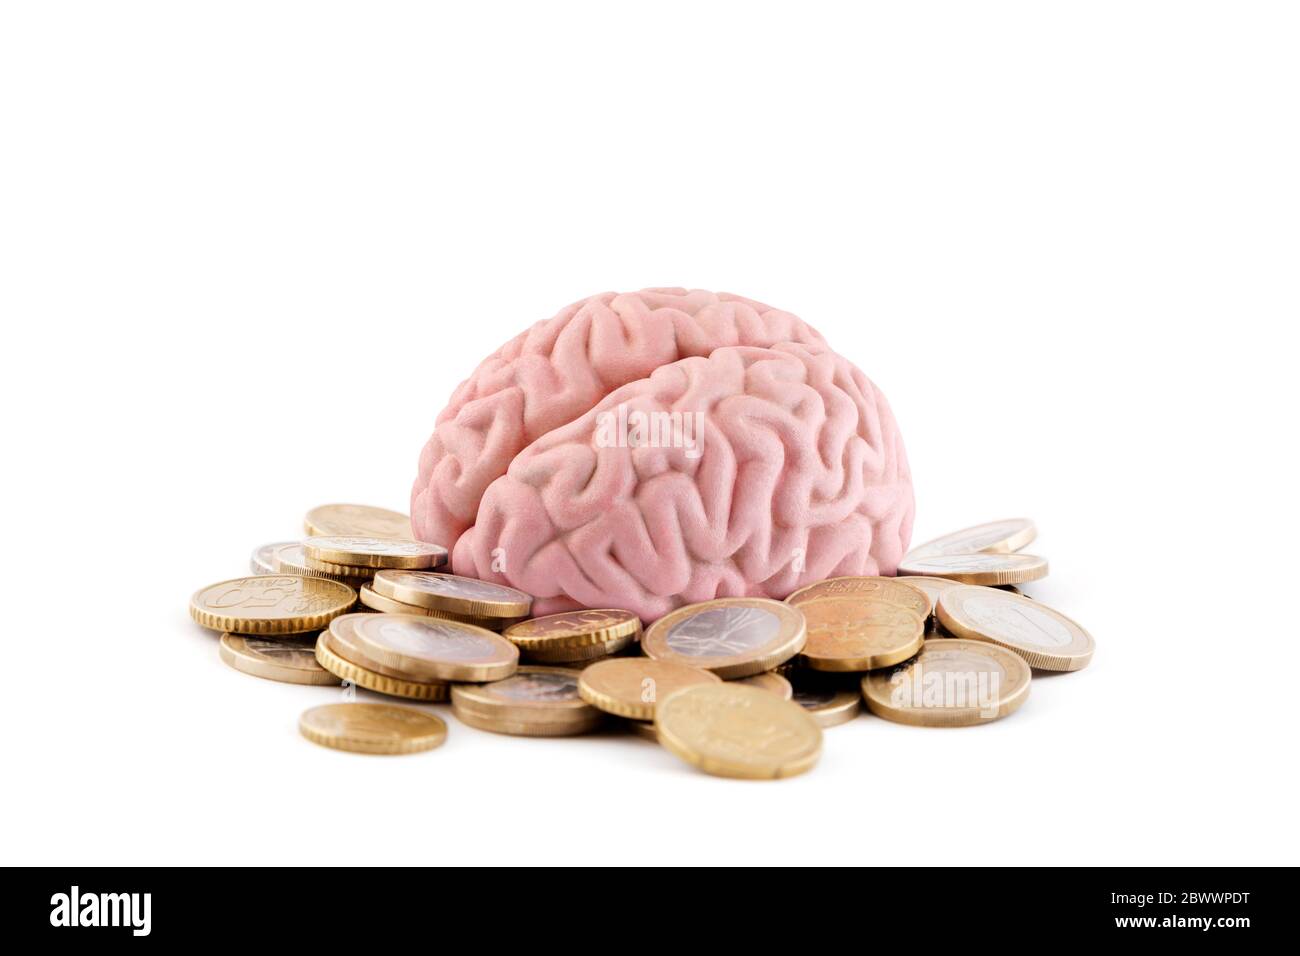 Human brain with coins on white background Stock Photo